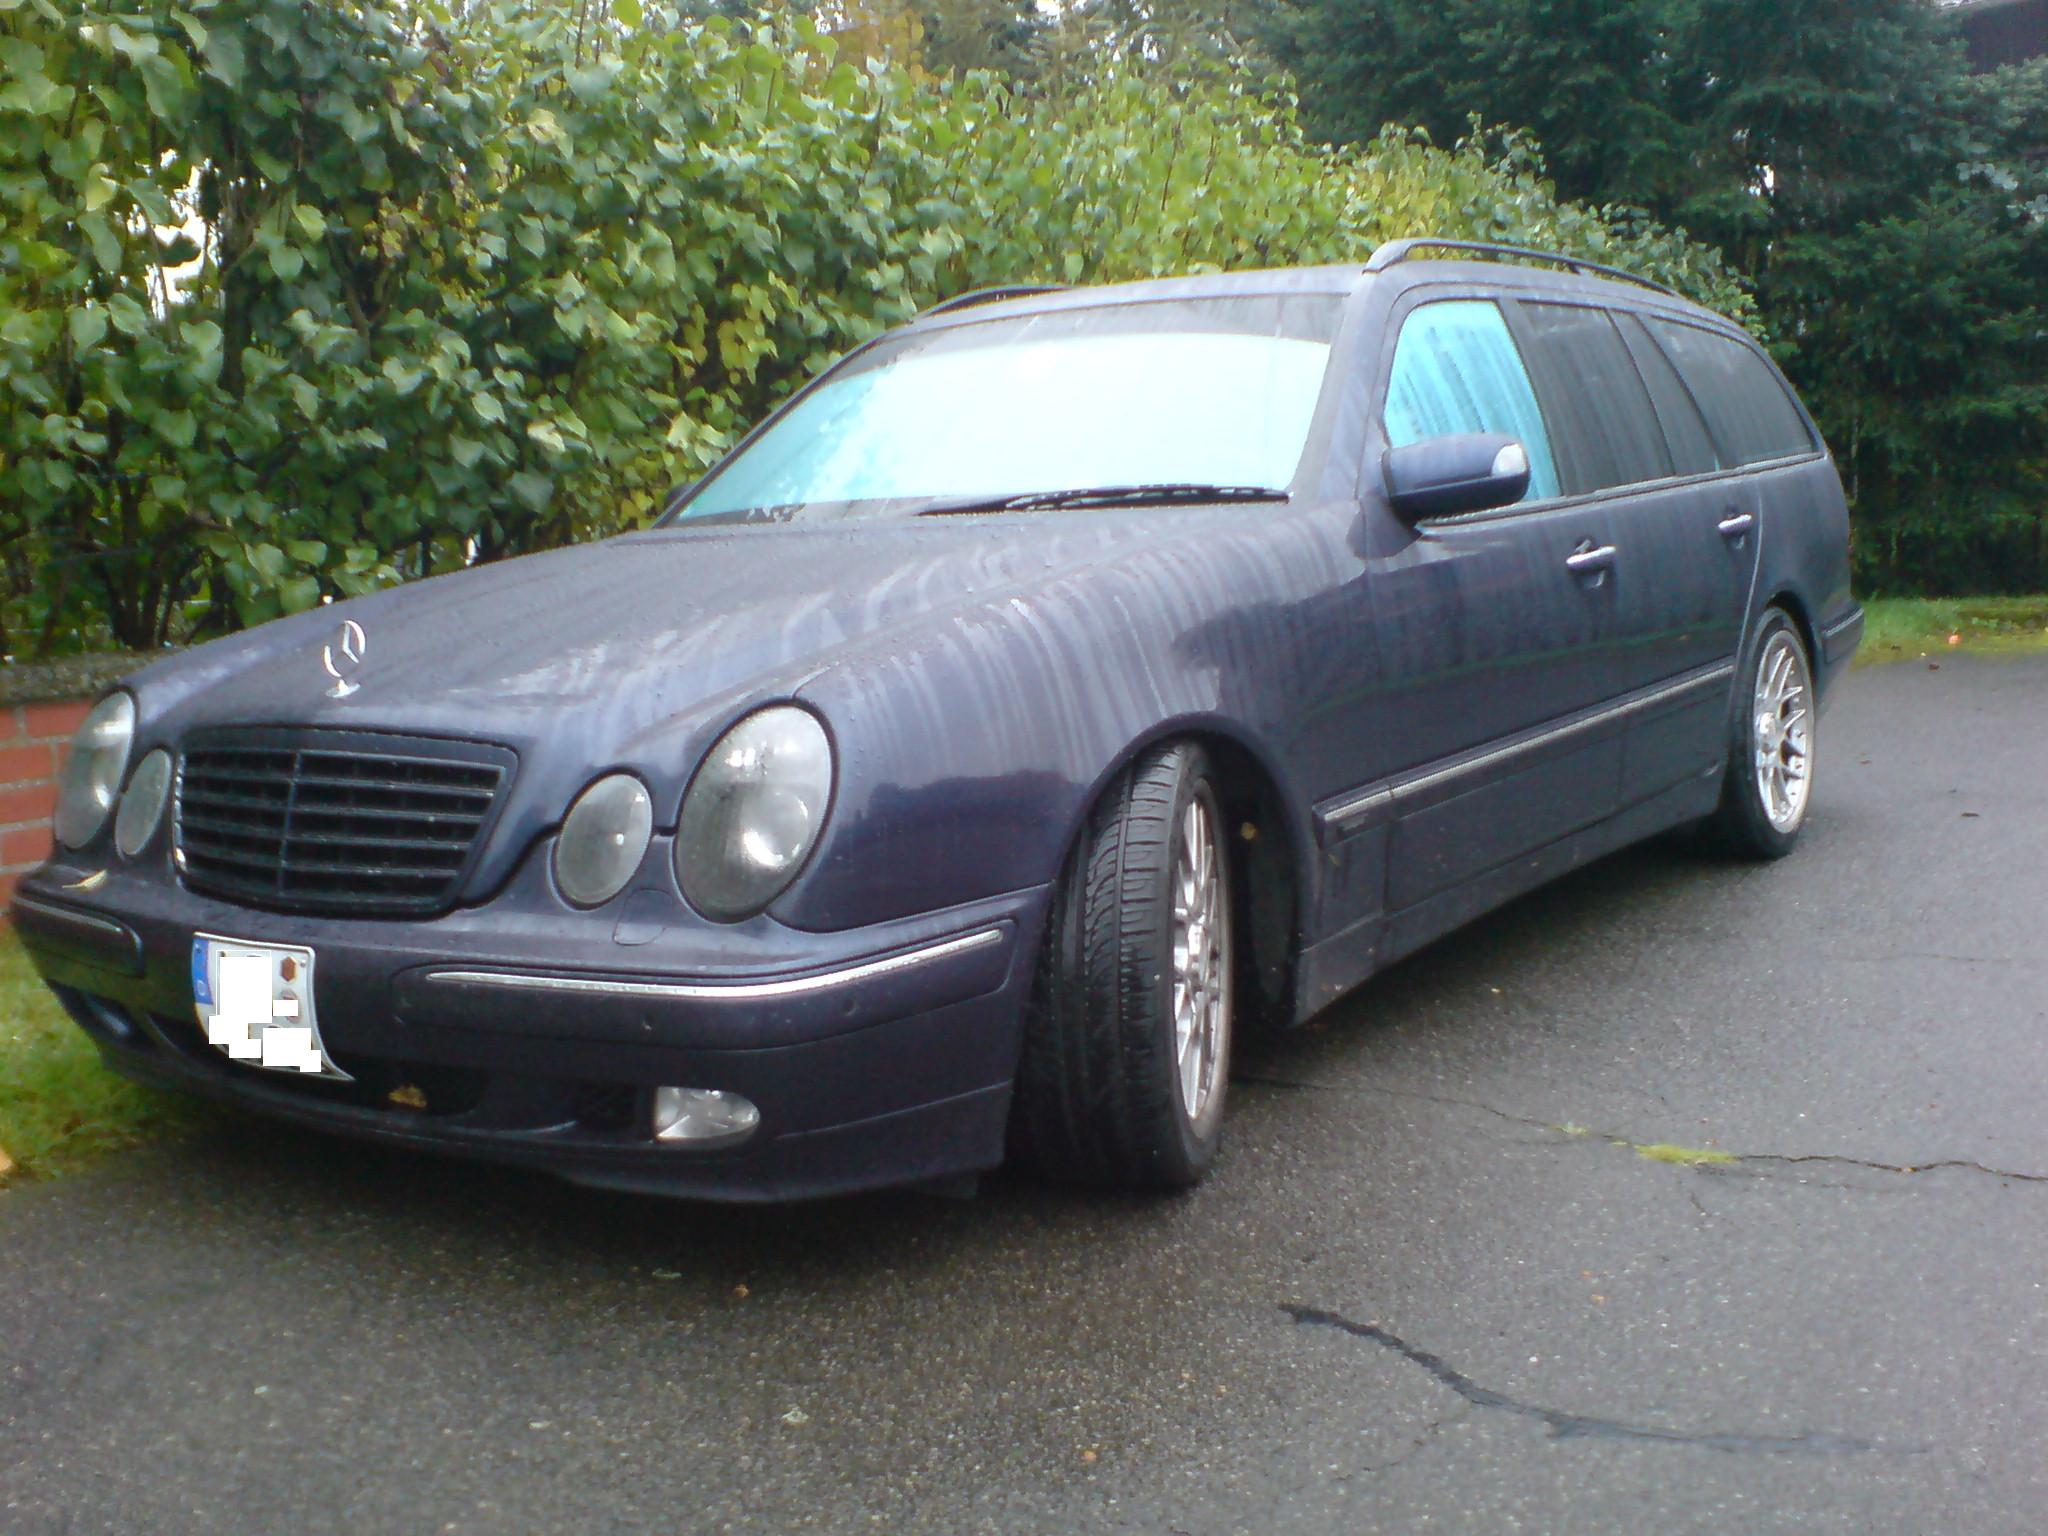 Brabusmay friends W210brabus Look best in anyone ever put a v polar